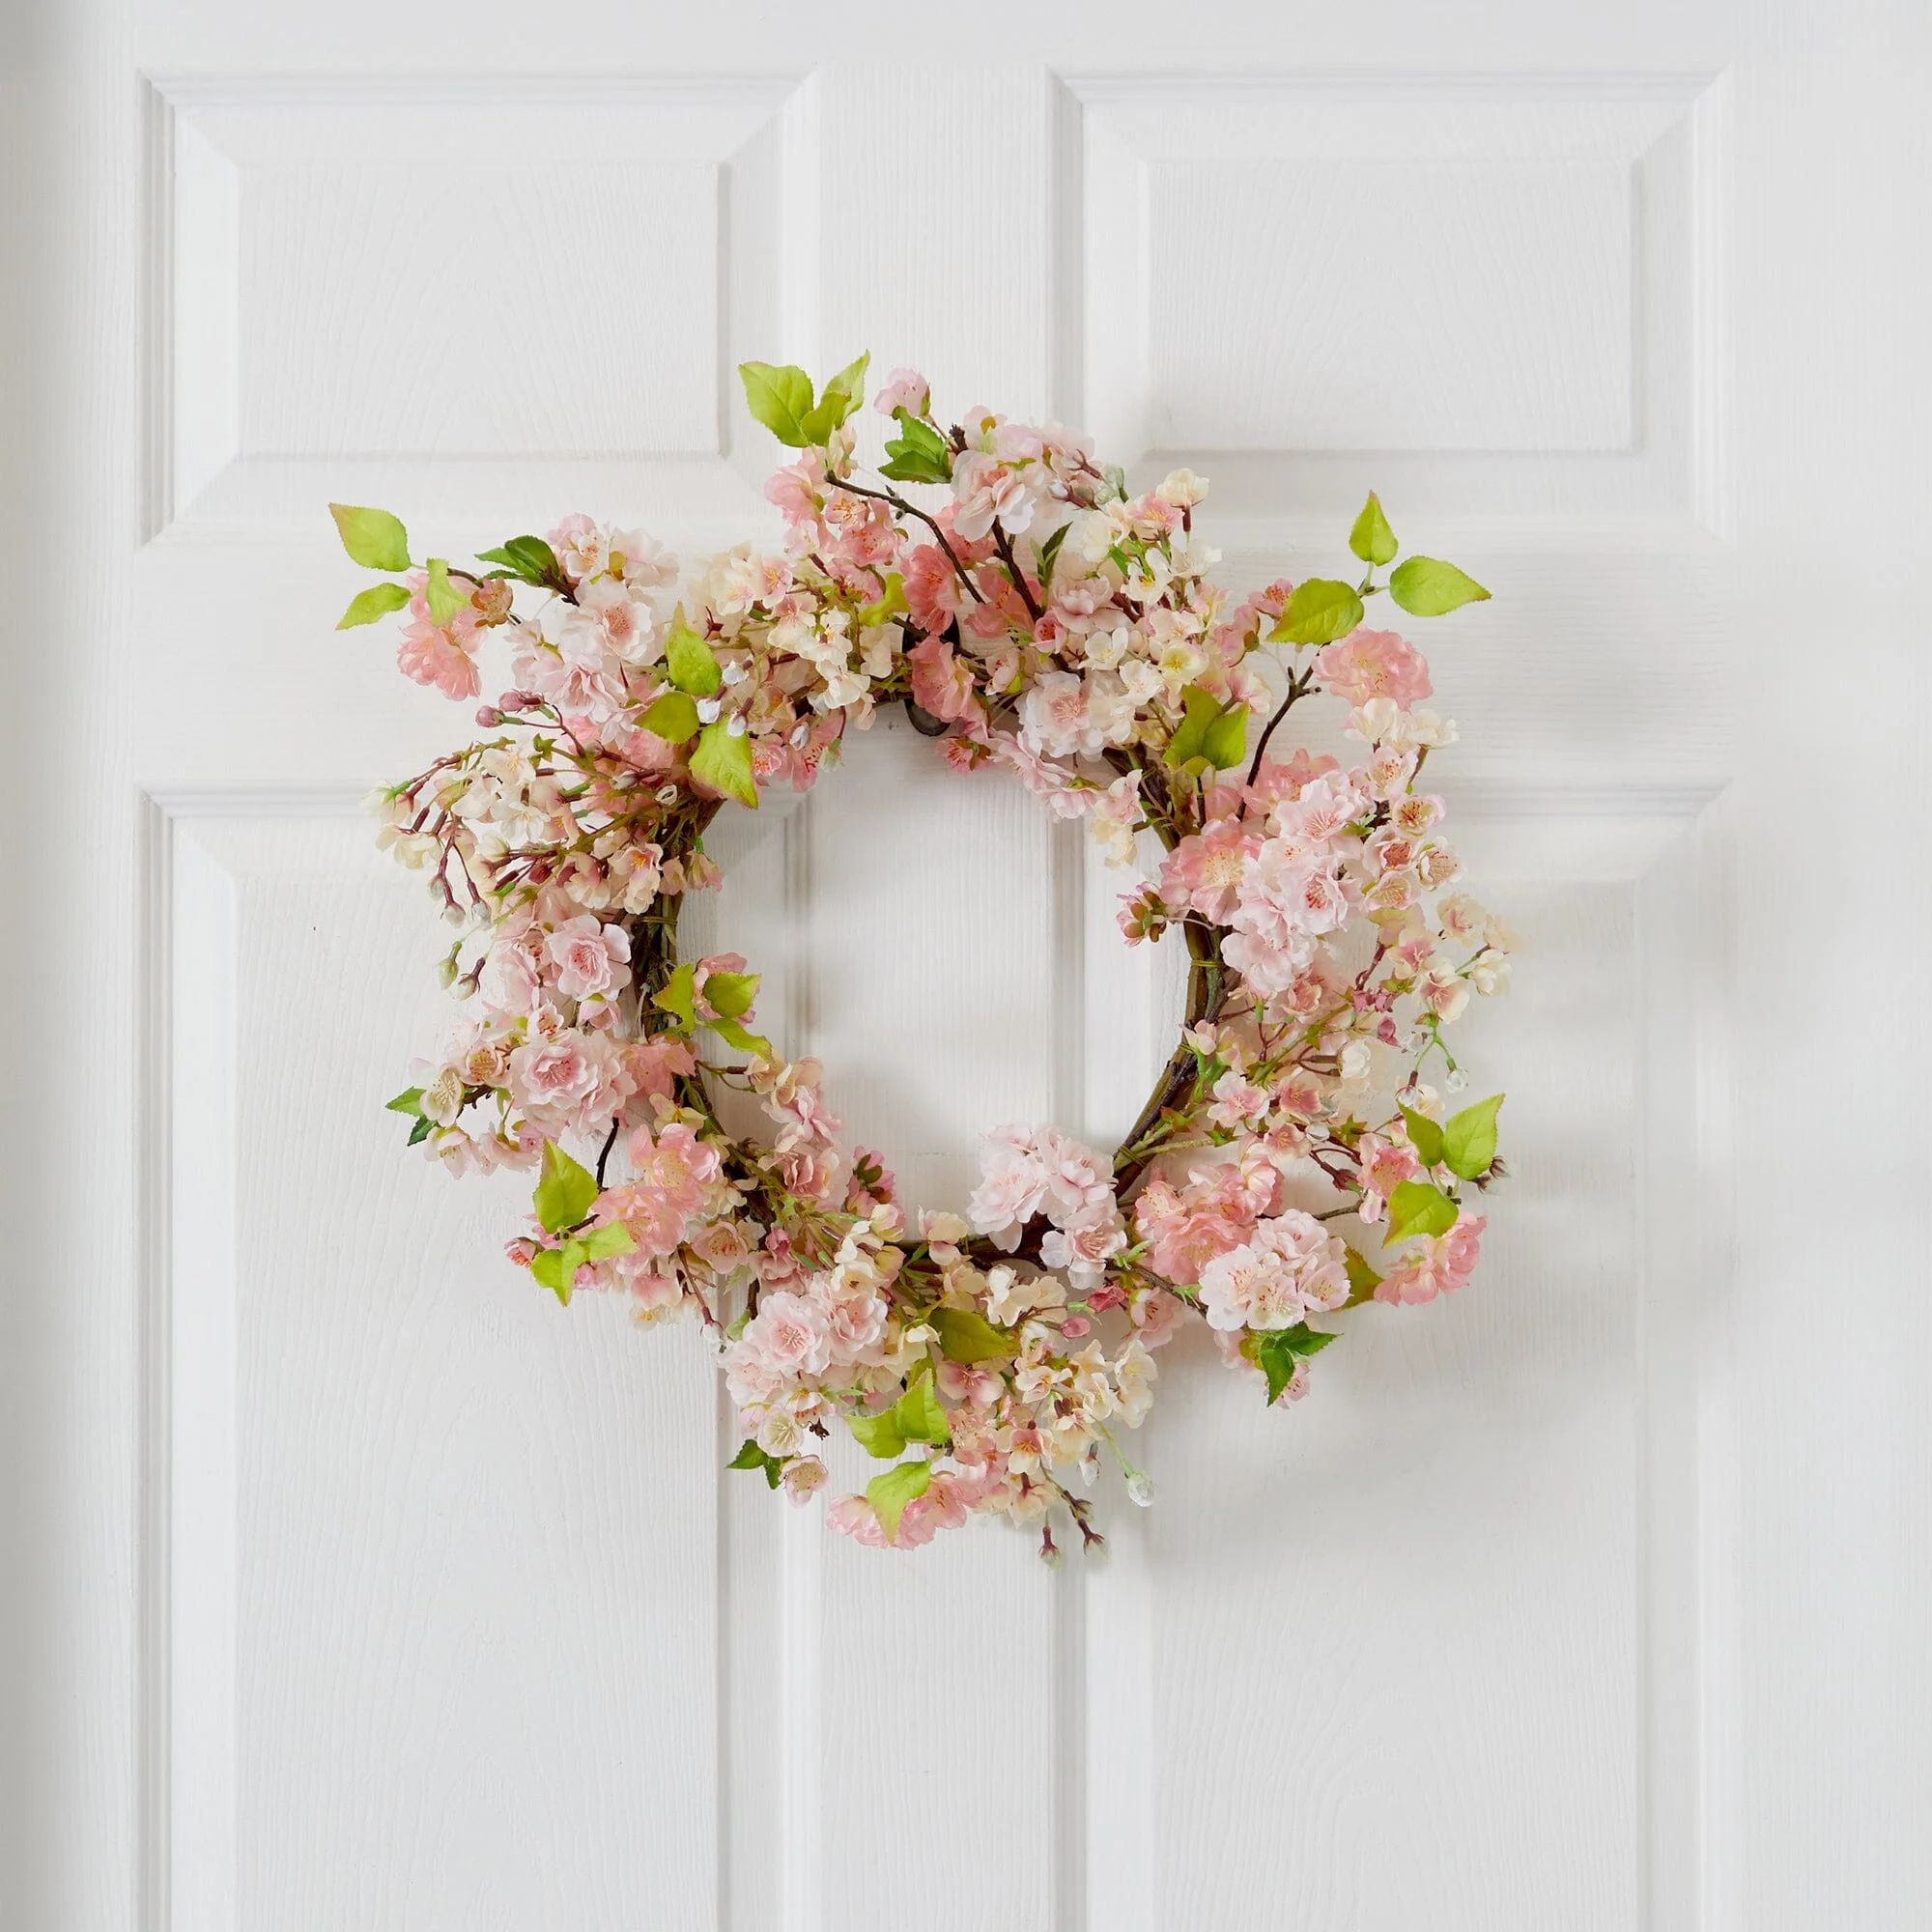 24" Cherry Blossom Wreath | Nearly Natural" | Nearly Natural